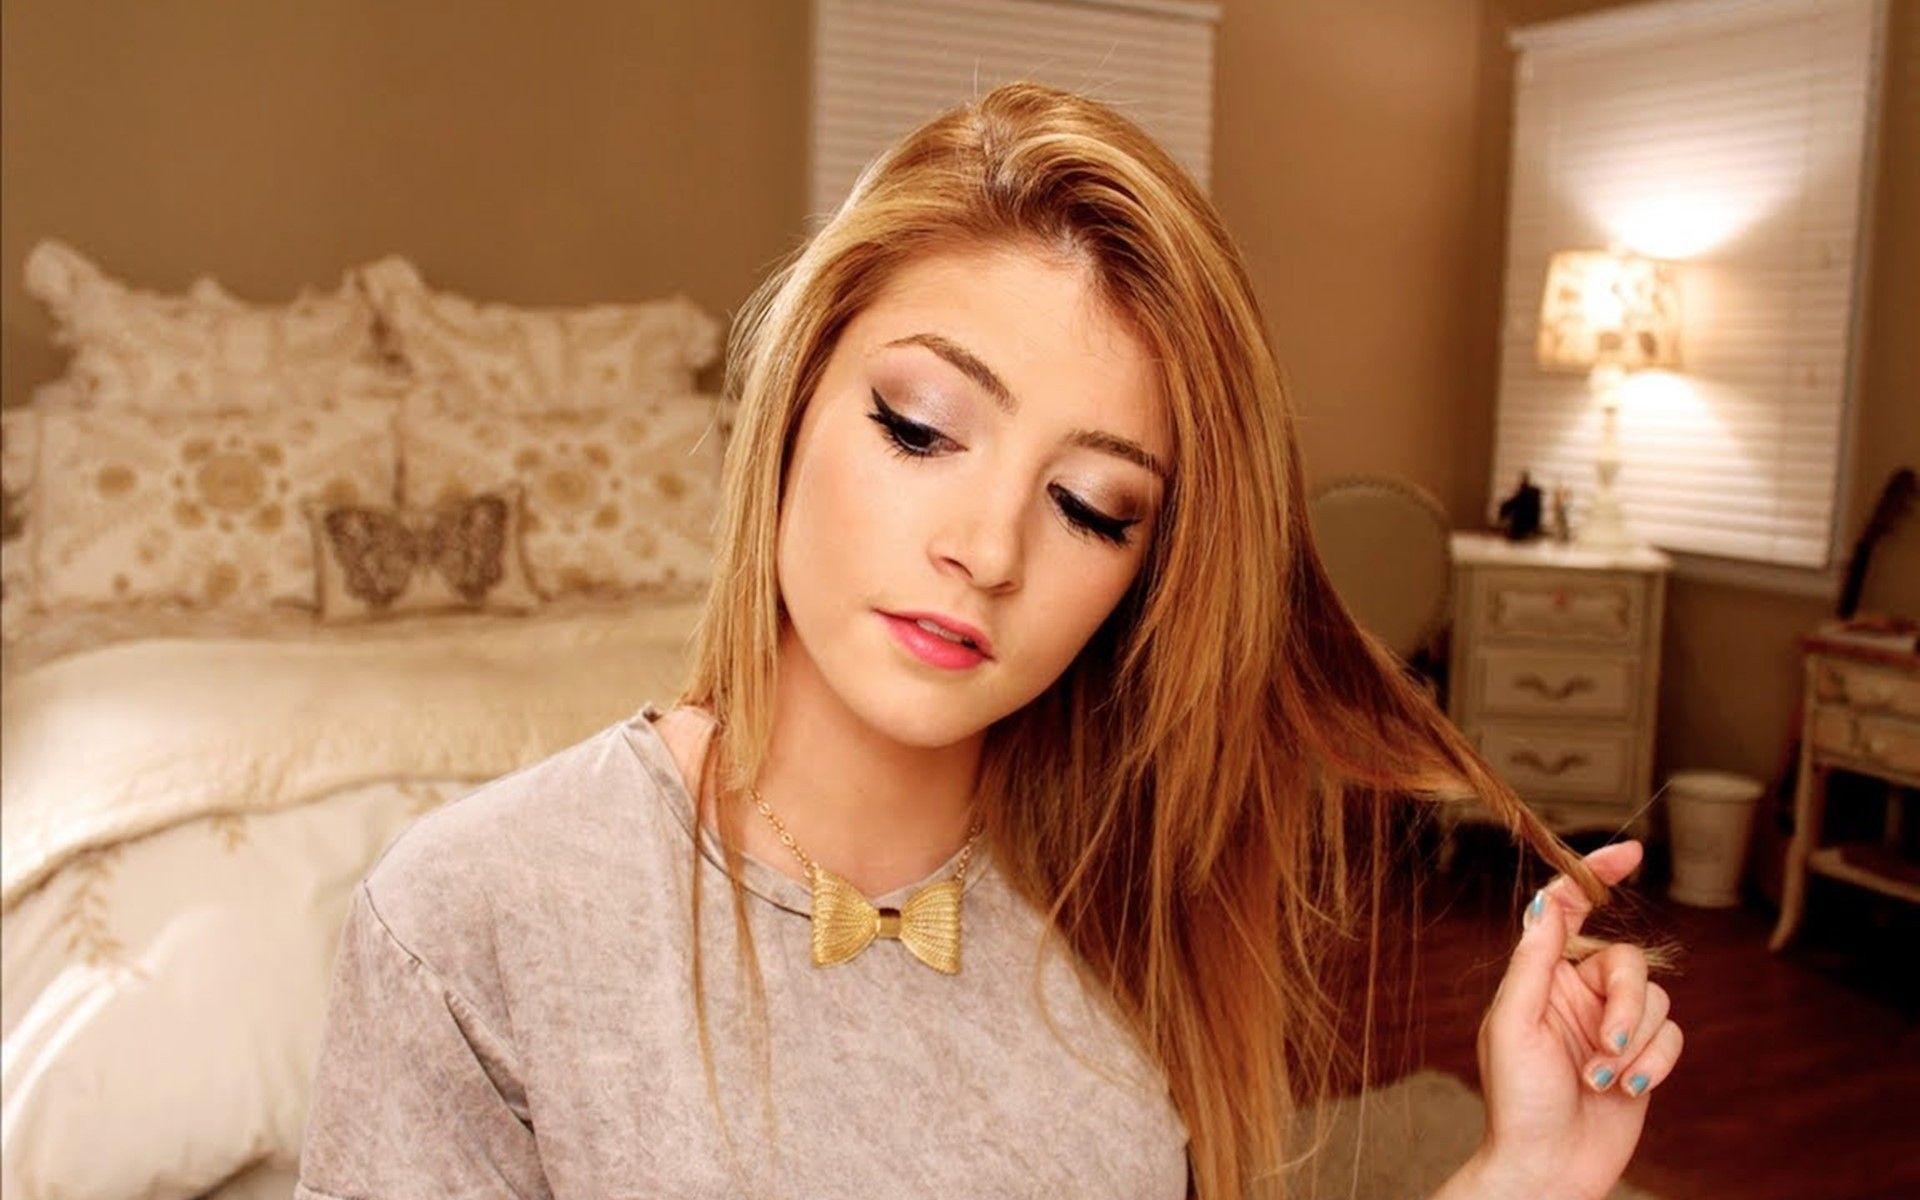 Stunning Chrissy Costanza musican young wallpaper